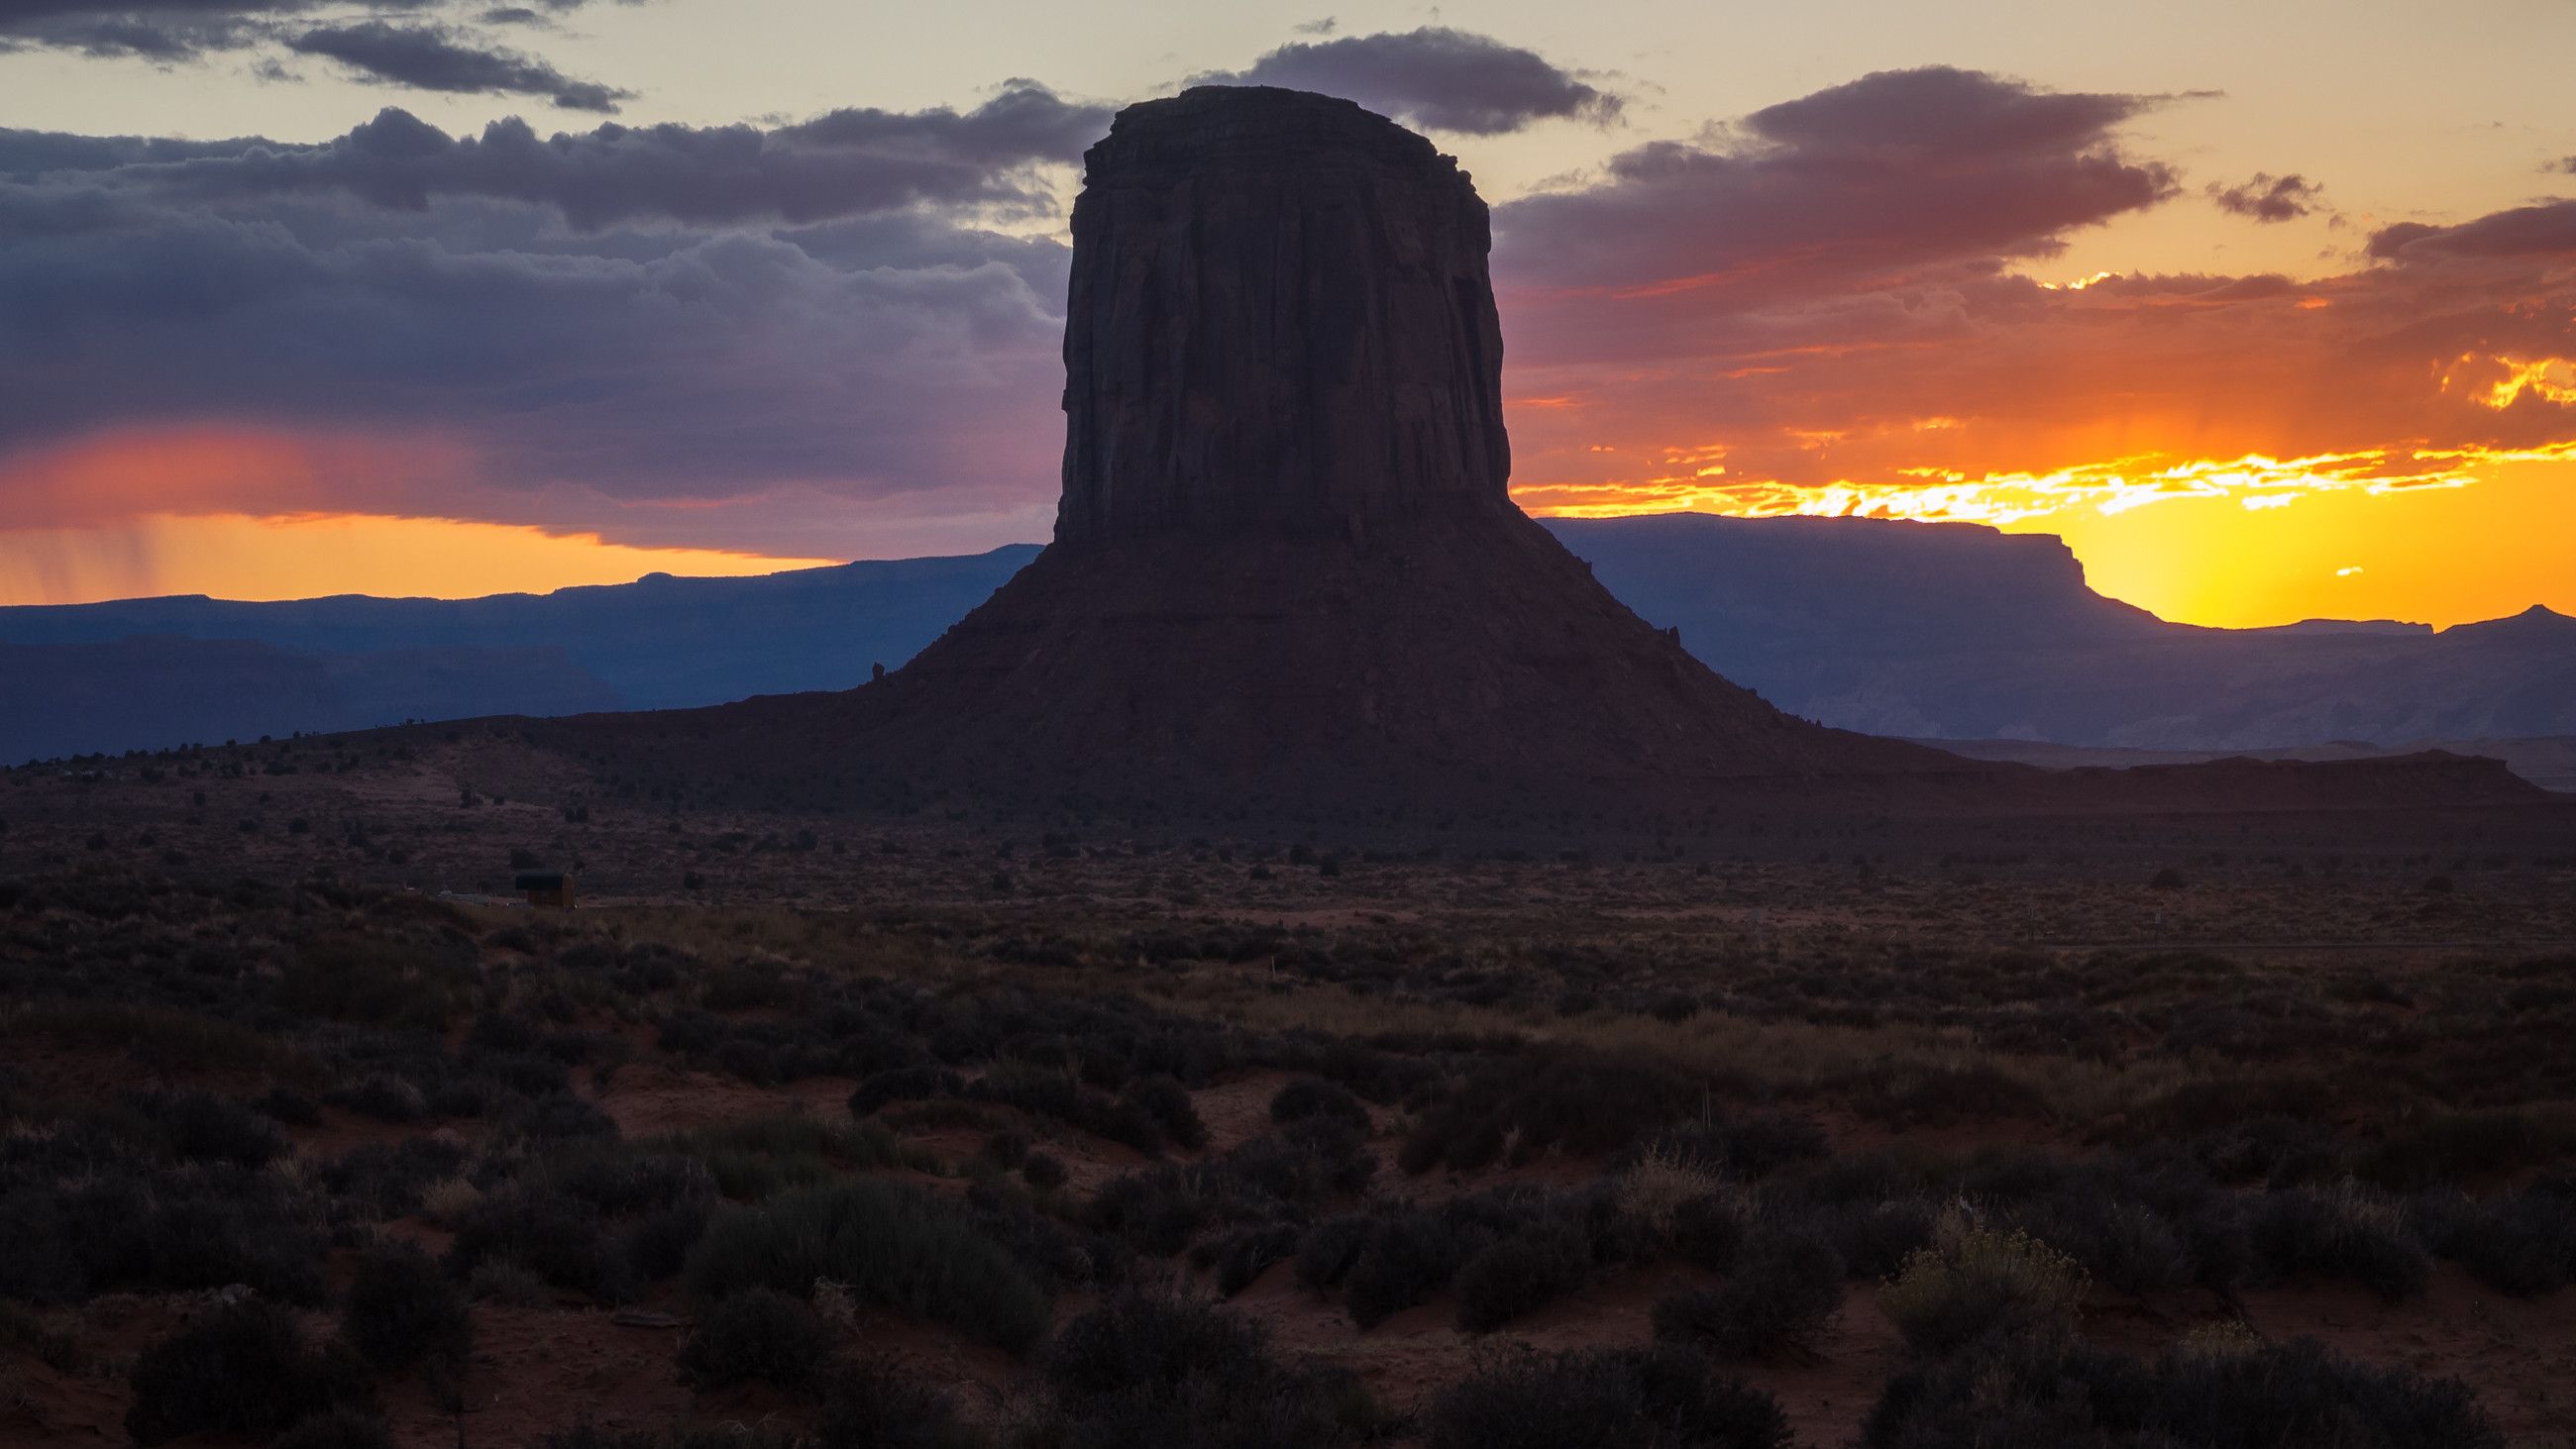 The horizon on fire after sunset in Monument Valley